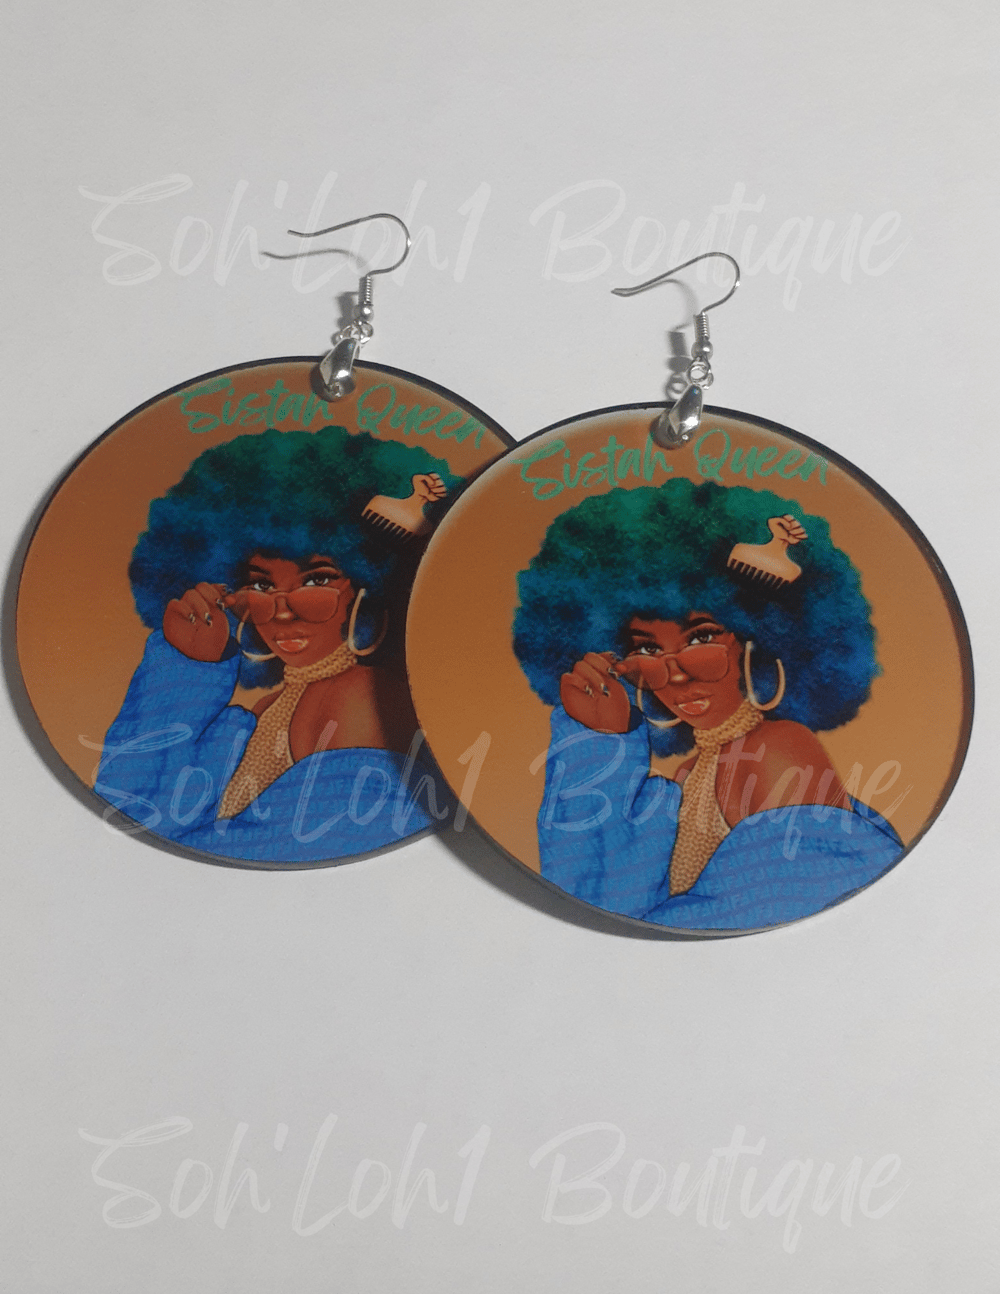 Image of Sistah Queen Black Art Acrylic Sublimation Afrocentric earrings